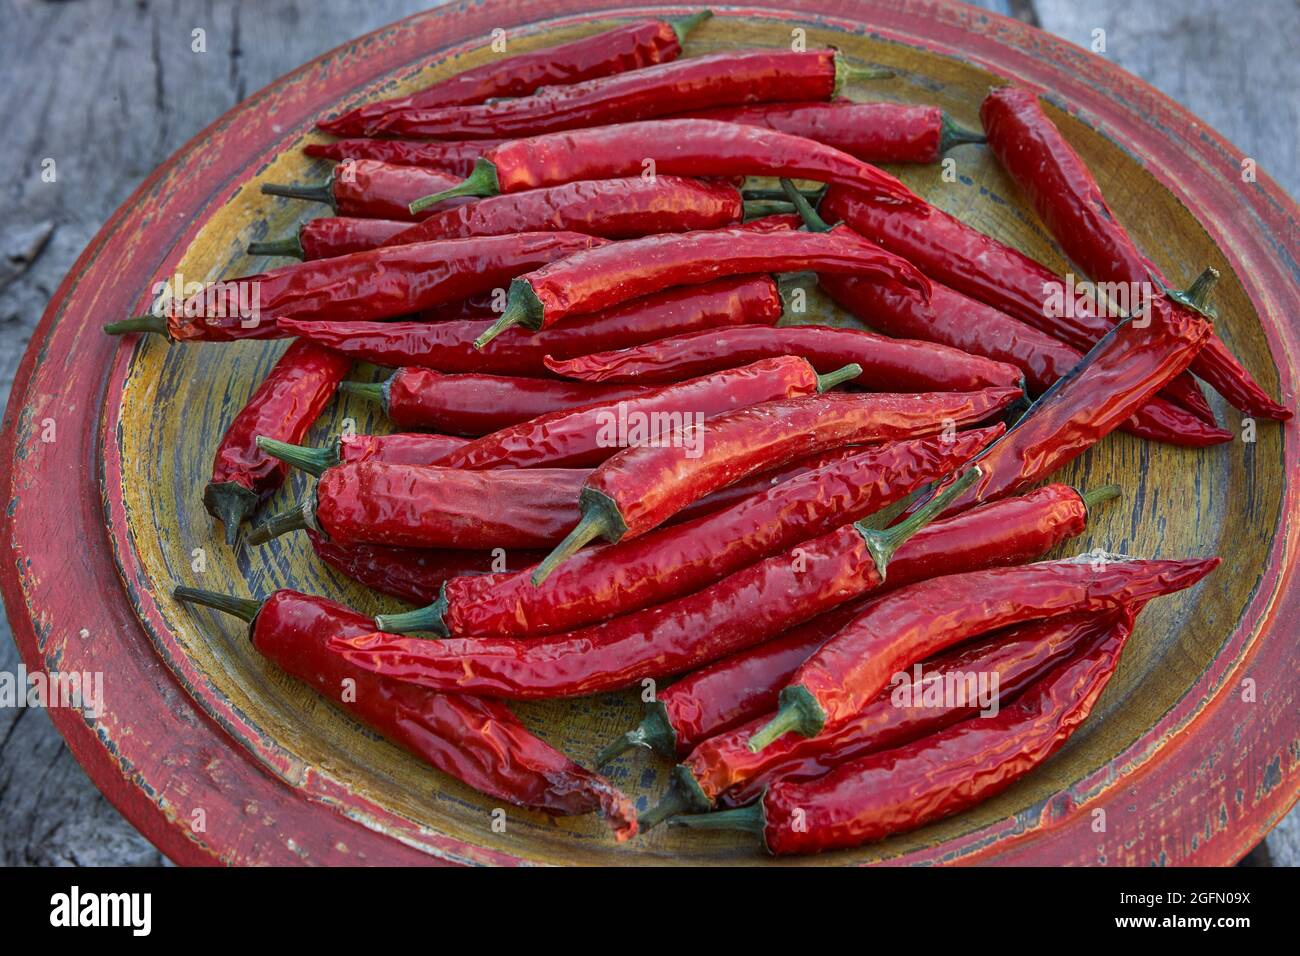 Italian long red peppers drying on earthenware plate Stock Photo